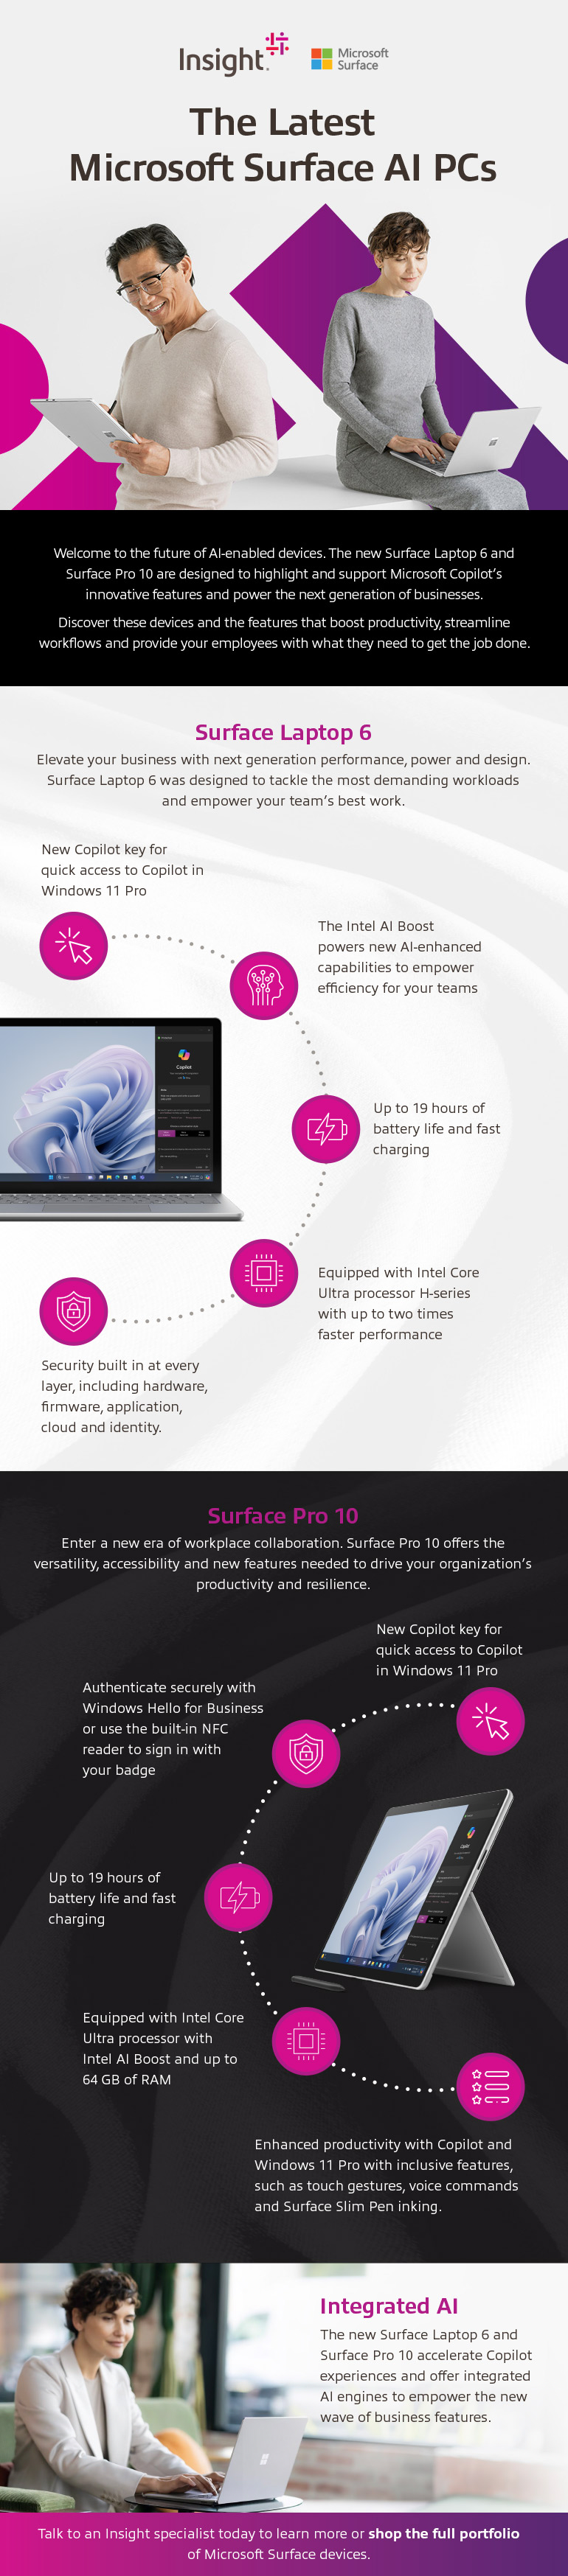 The Latest Microsoft Surface AI PCs  infographic as transcribed below